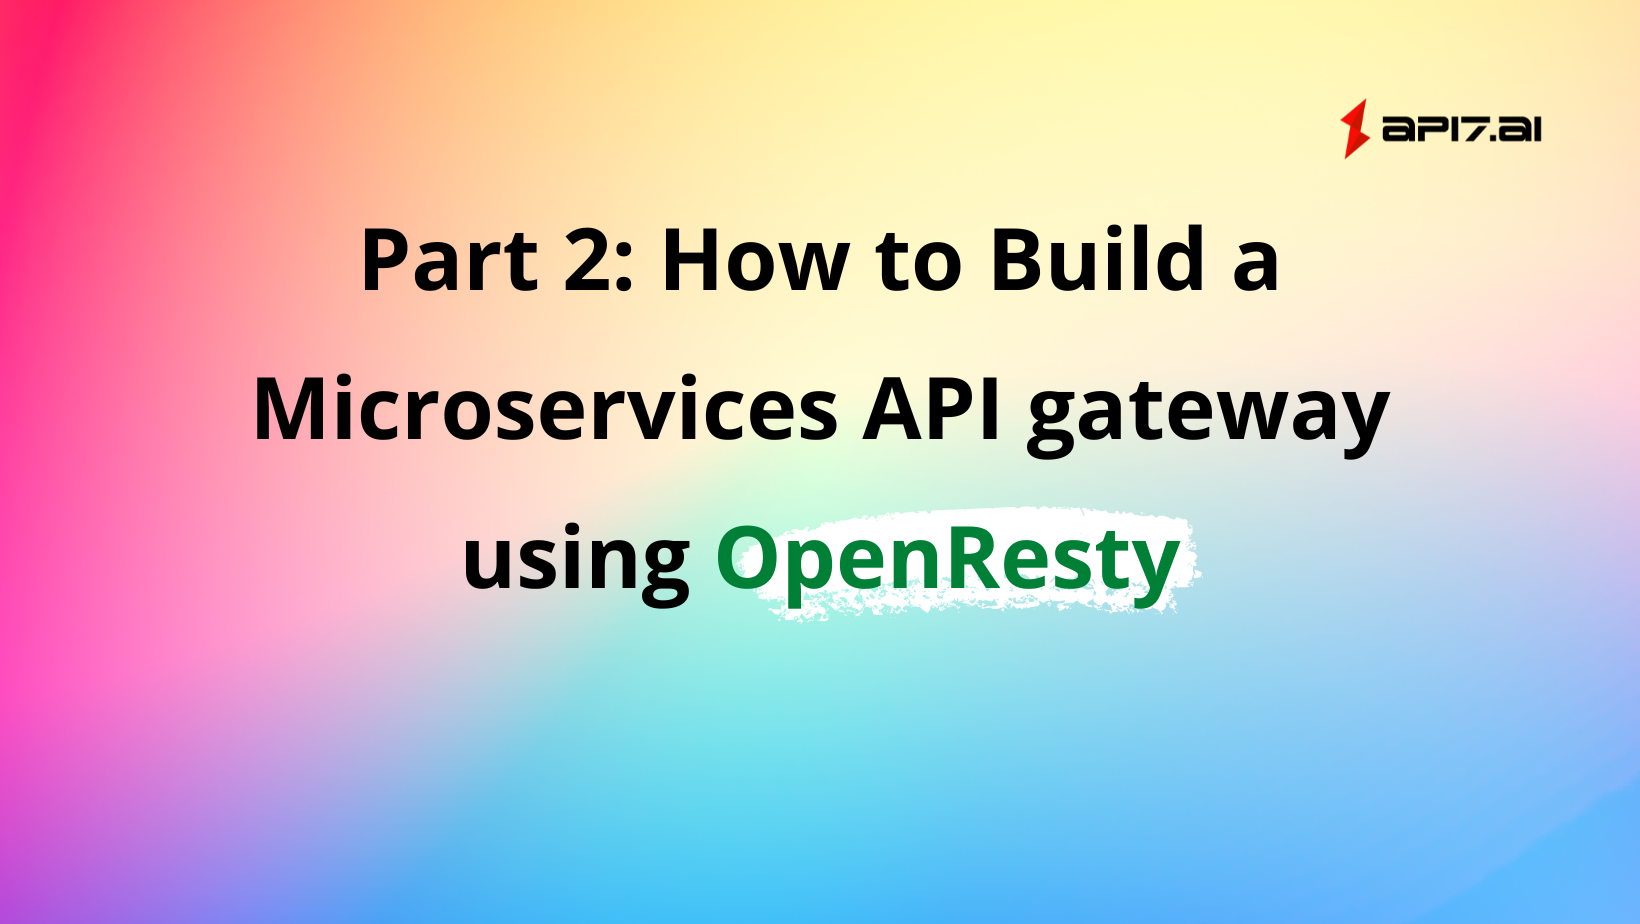 Part 2: How to Build a Microservices API gateway using OpenResty